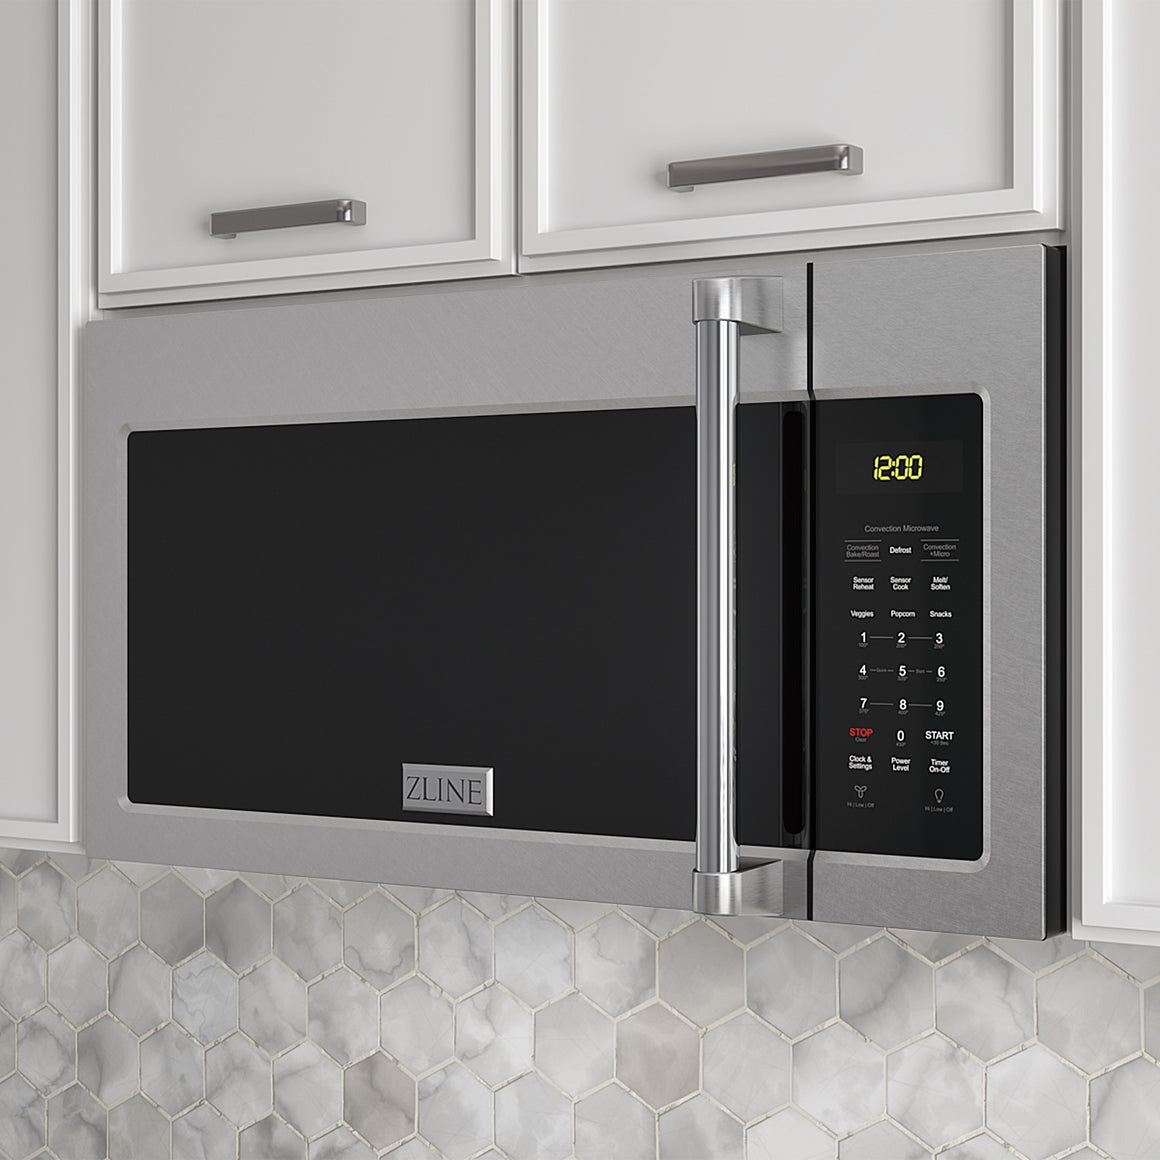 ZLINE Over the Range Convection Microwave Oven in DuraSnow® Stainless Steel with Traditional Handle and Sensor Cooking